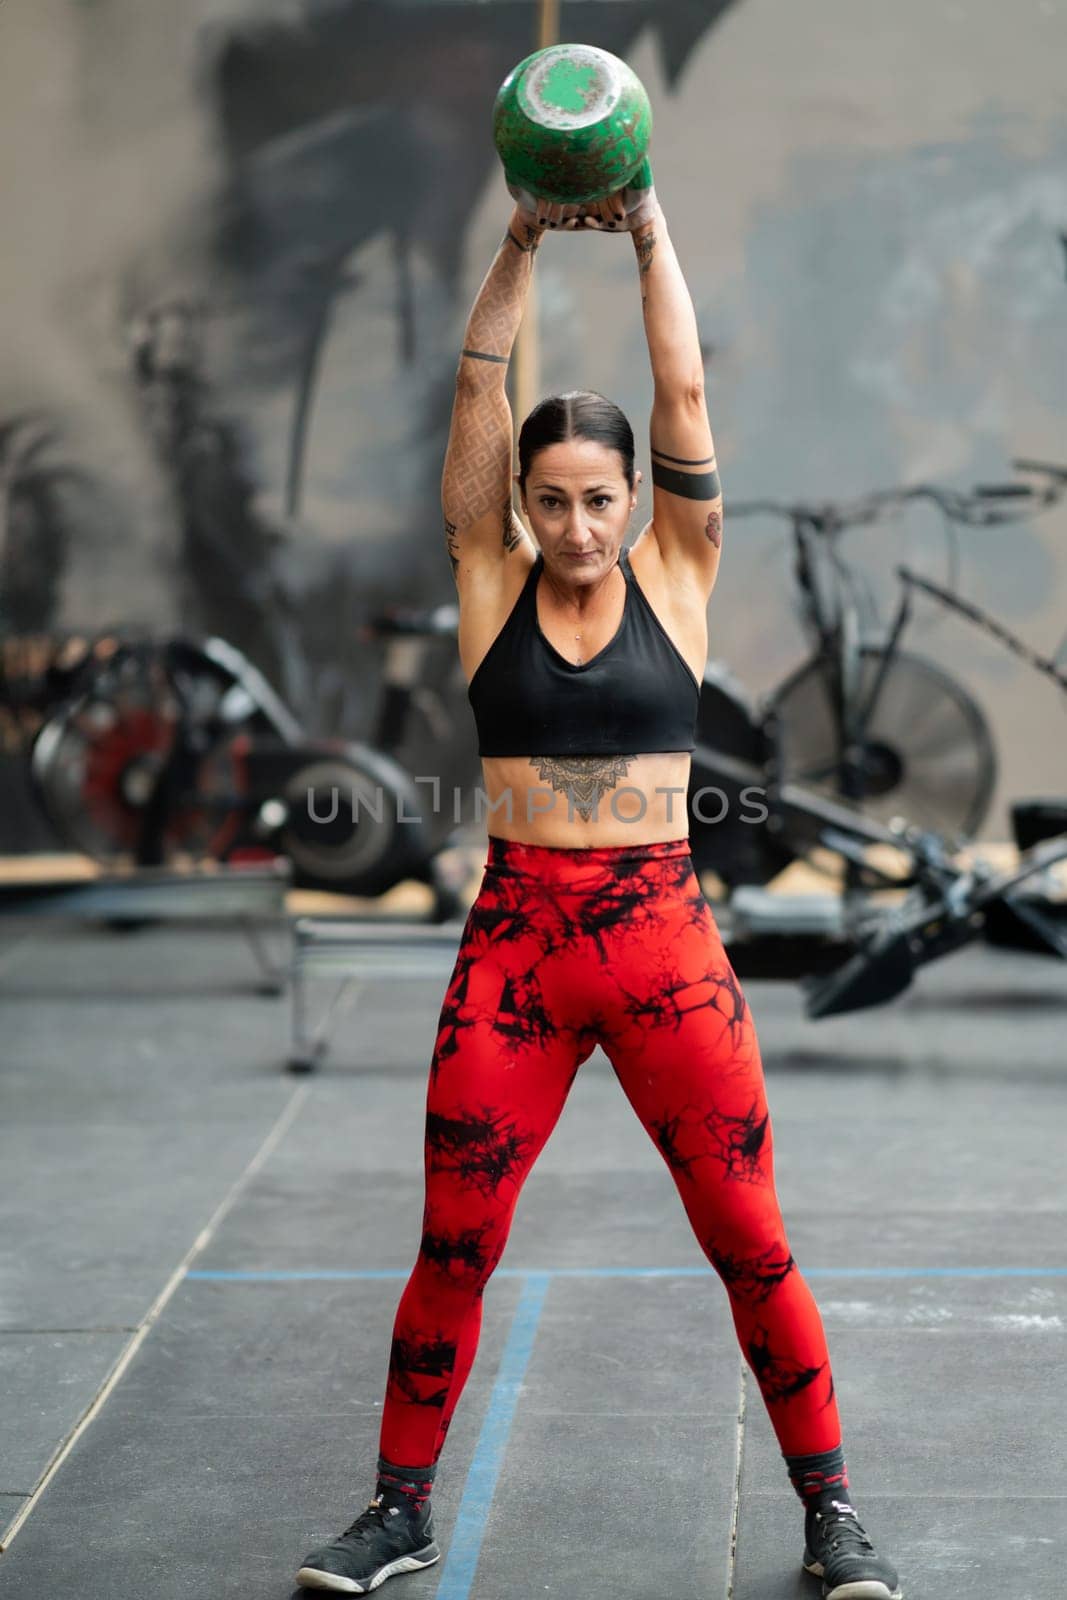 Woman lifting a kettlebell standing in a cross training gym by javiindy